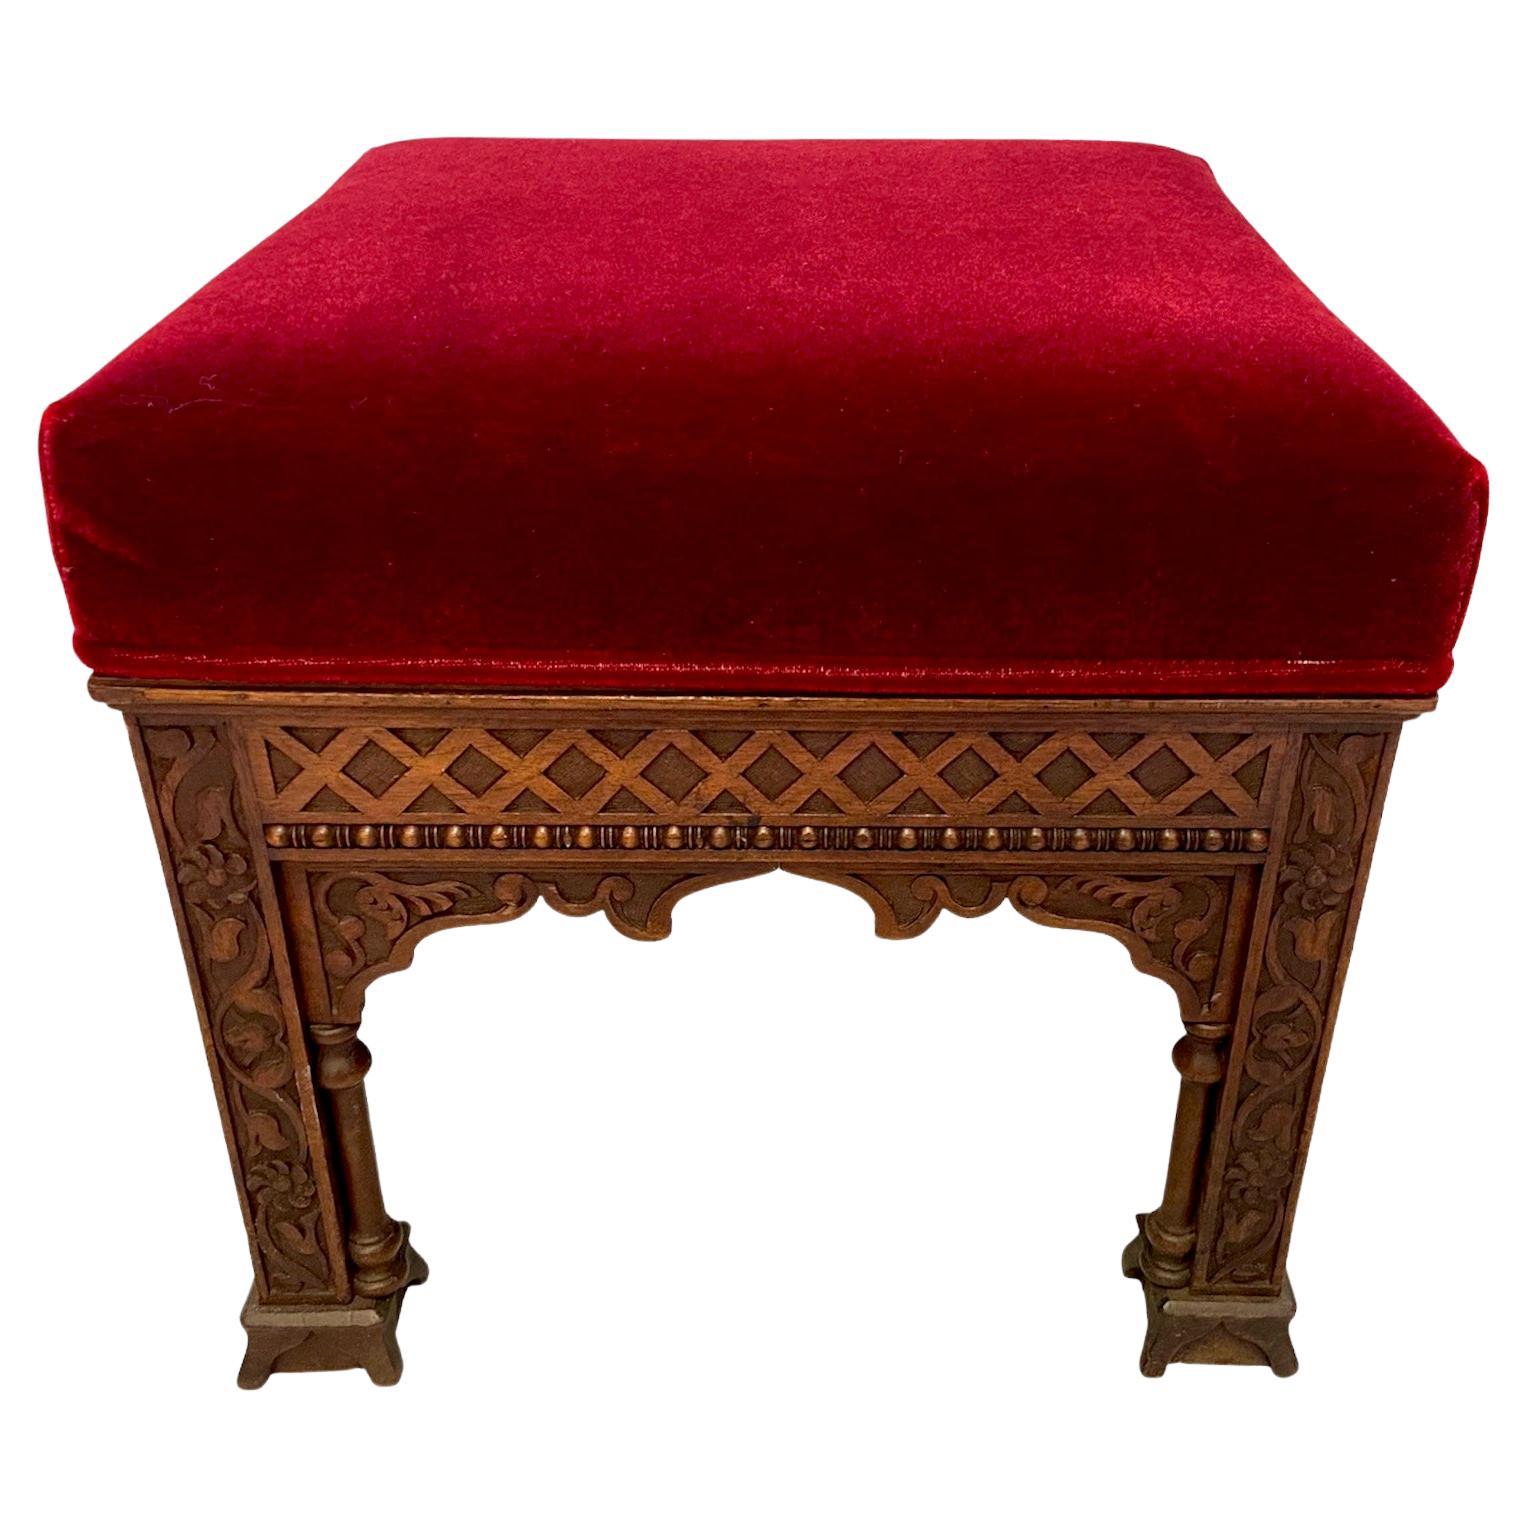 intricate victorian / arts and crafts moorish style stool, possibly Liberty. 
Please note that our handling time is often much shorter than advertised.